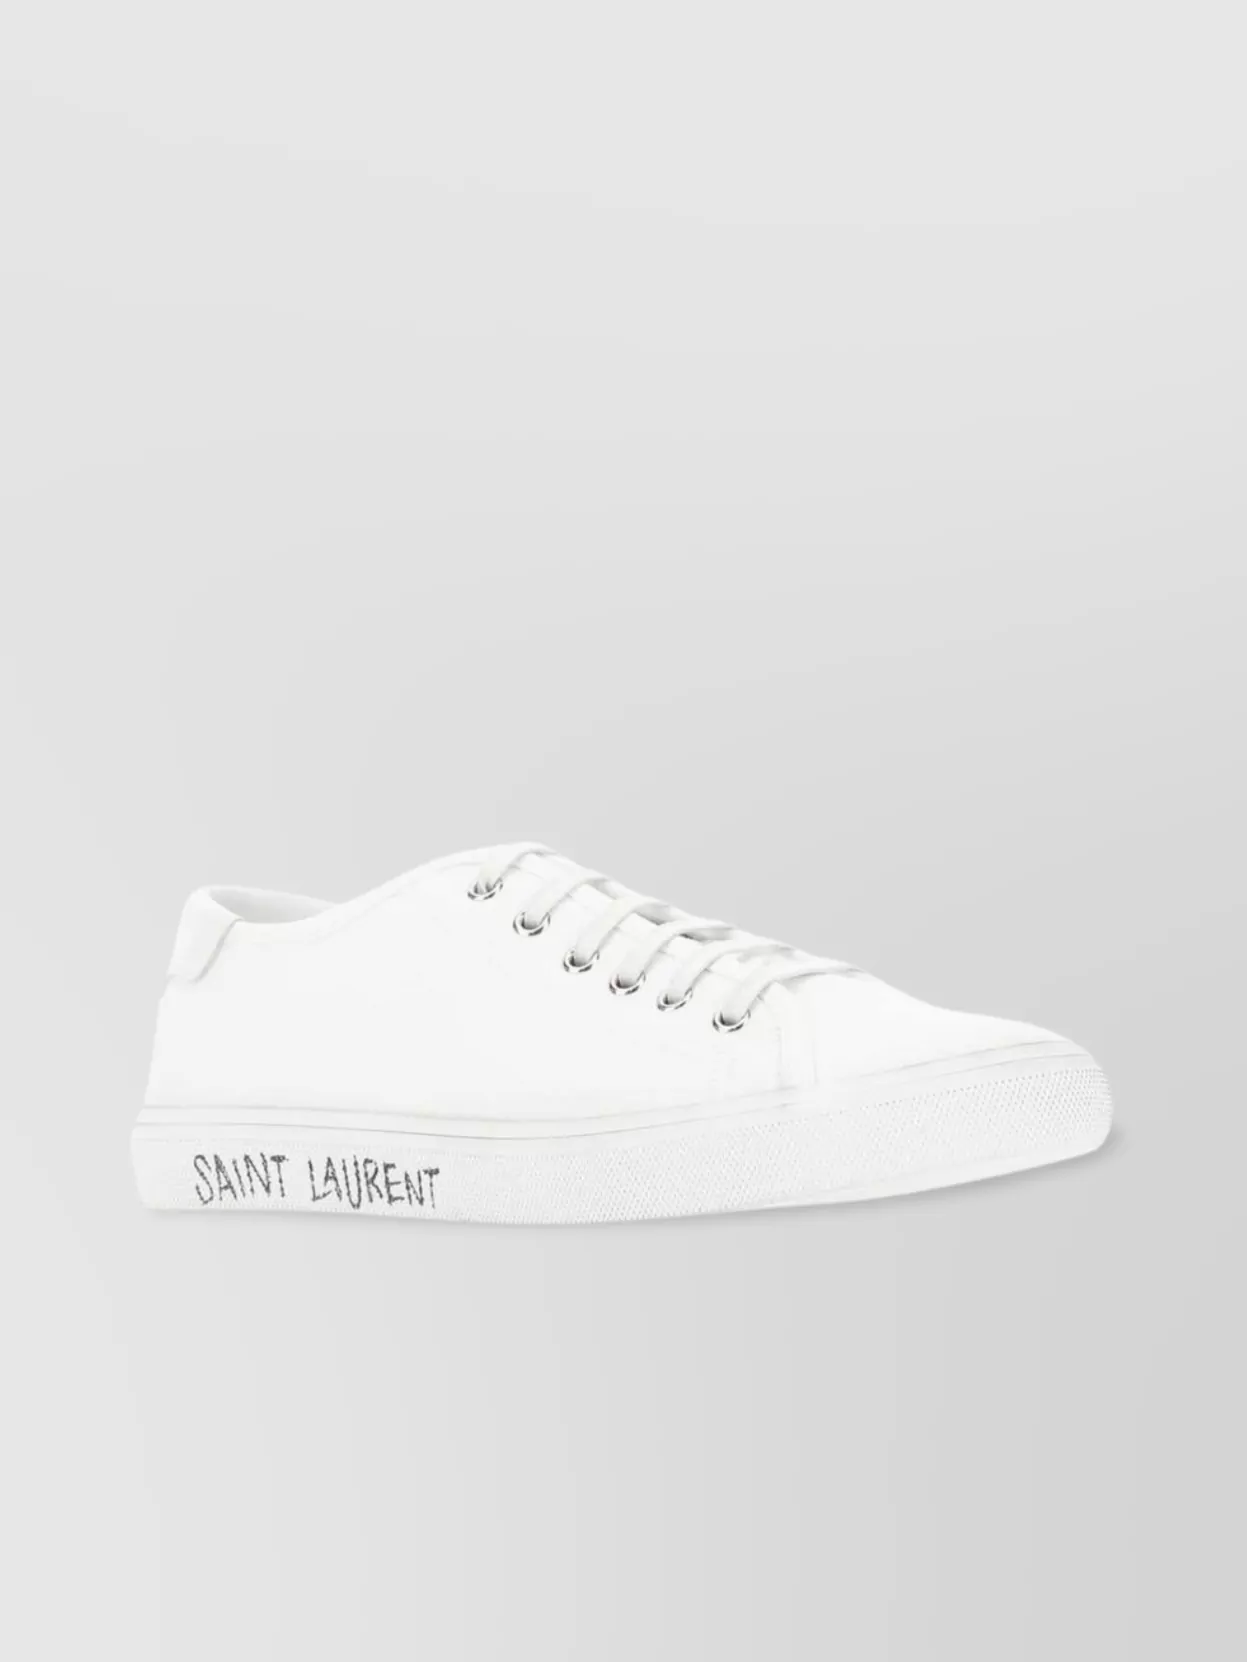 Shop Saint Laurent Canvas Sneakers With Flat Sole And Round Toe